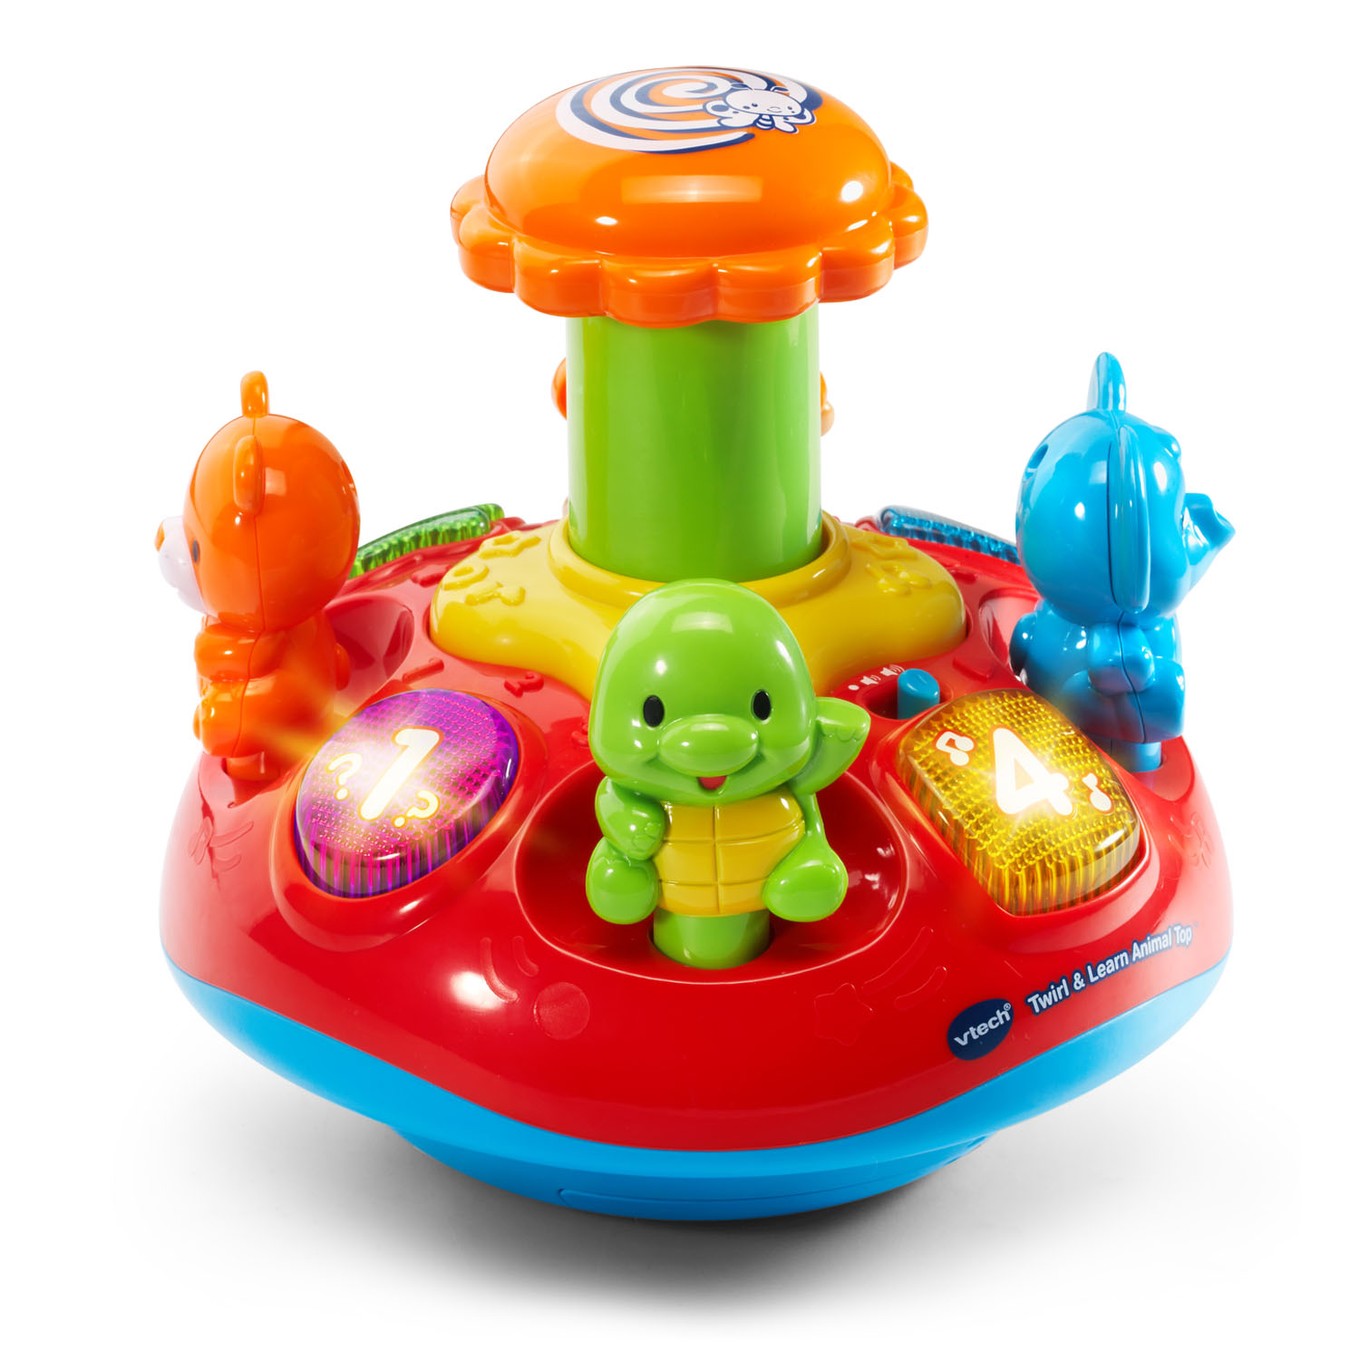 VTech Spin 'n Learn Top Sea Life Toy Animals Carousel 8 X8 Fun for sale online